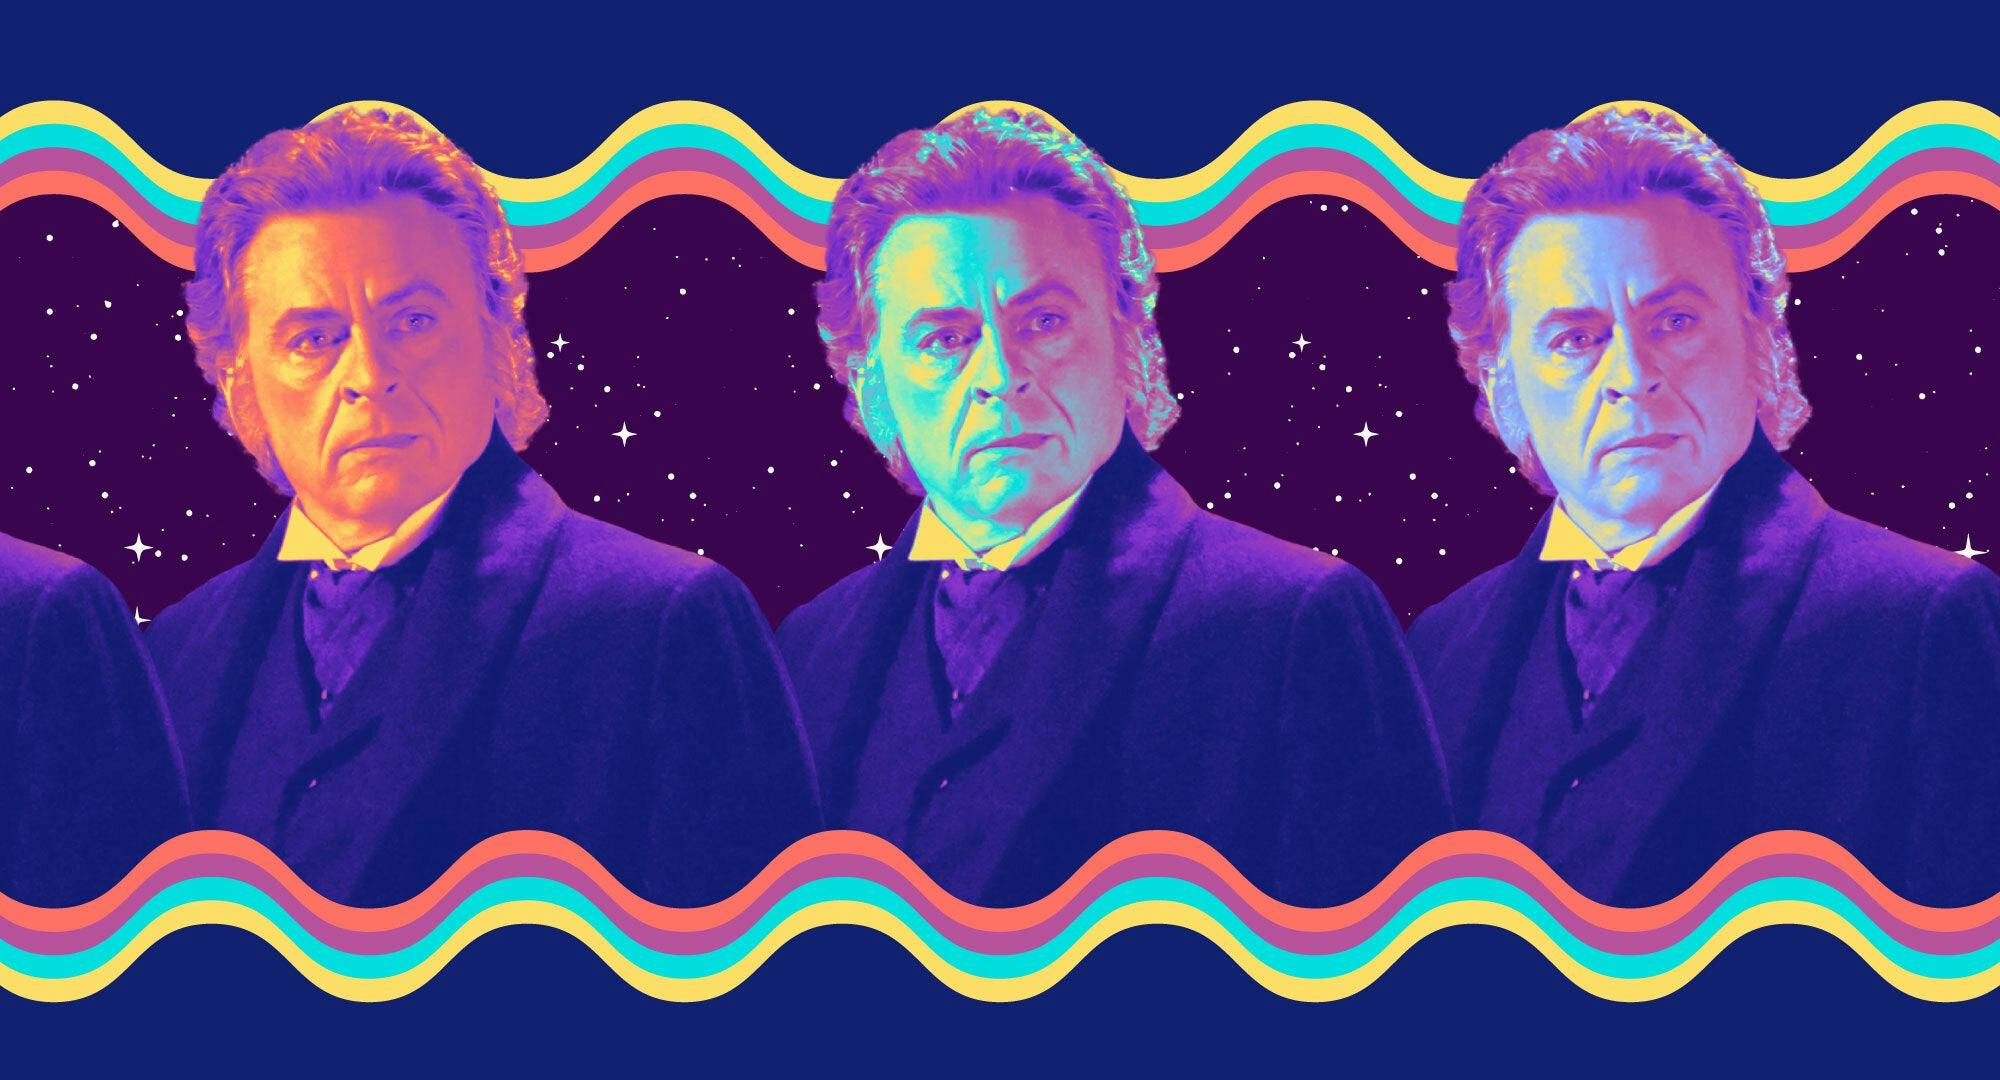 Three of the same images of Professor Moriarty from TNG in a row on a stylized background